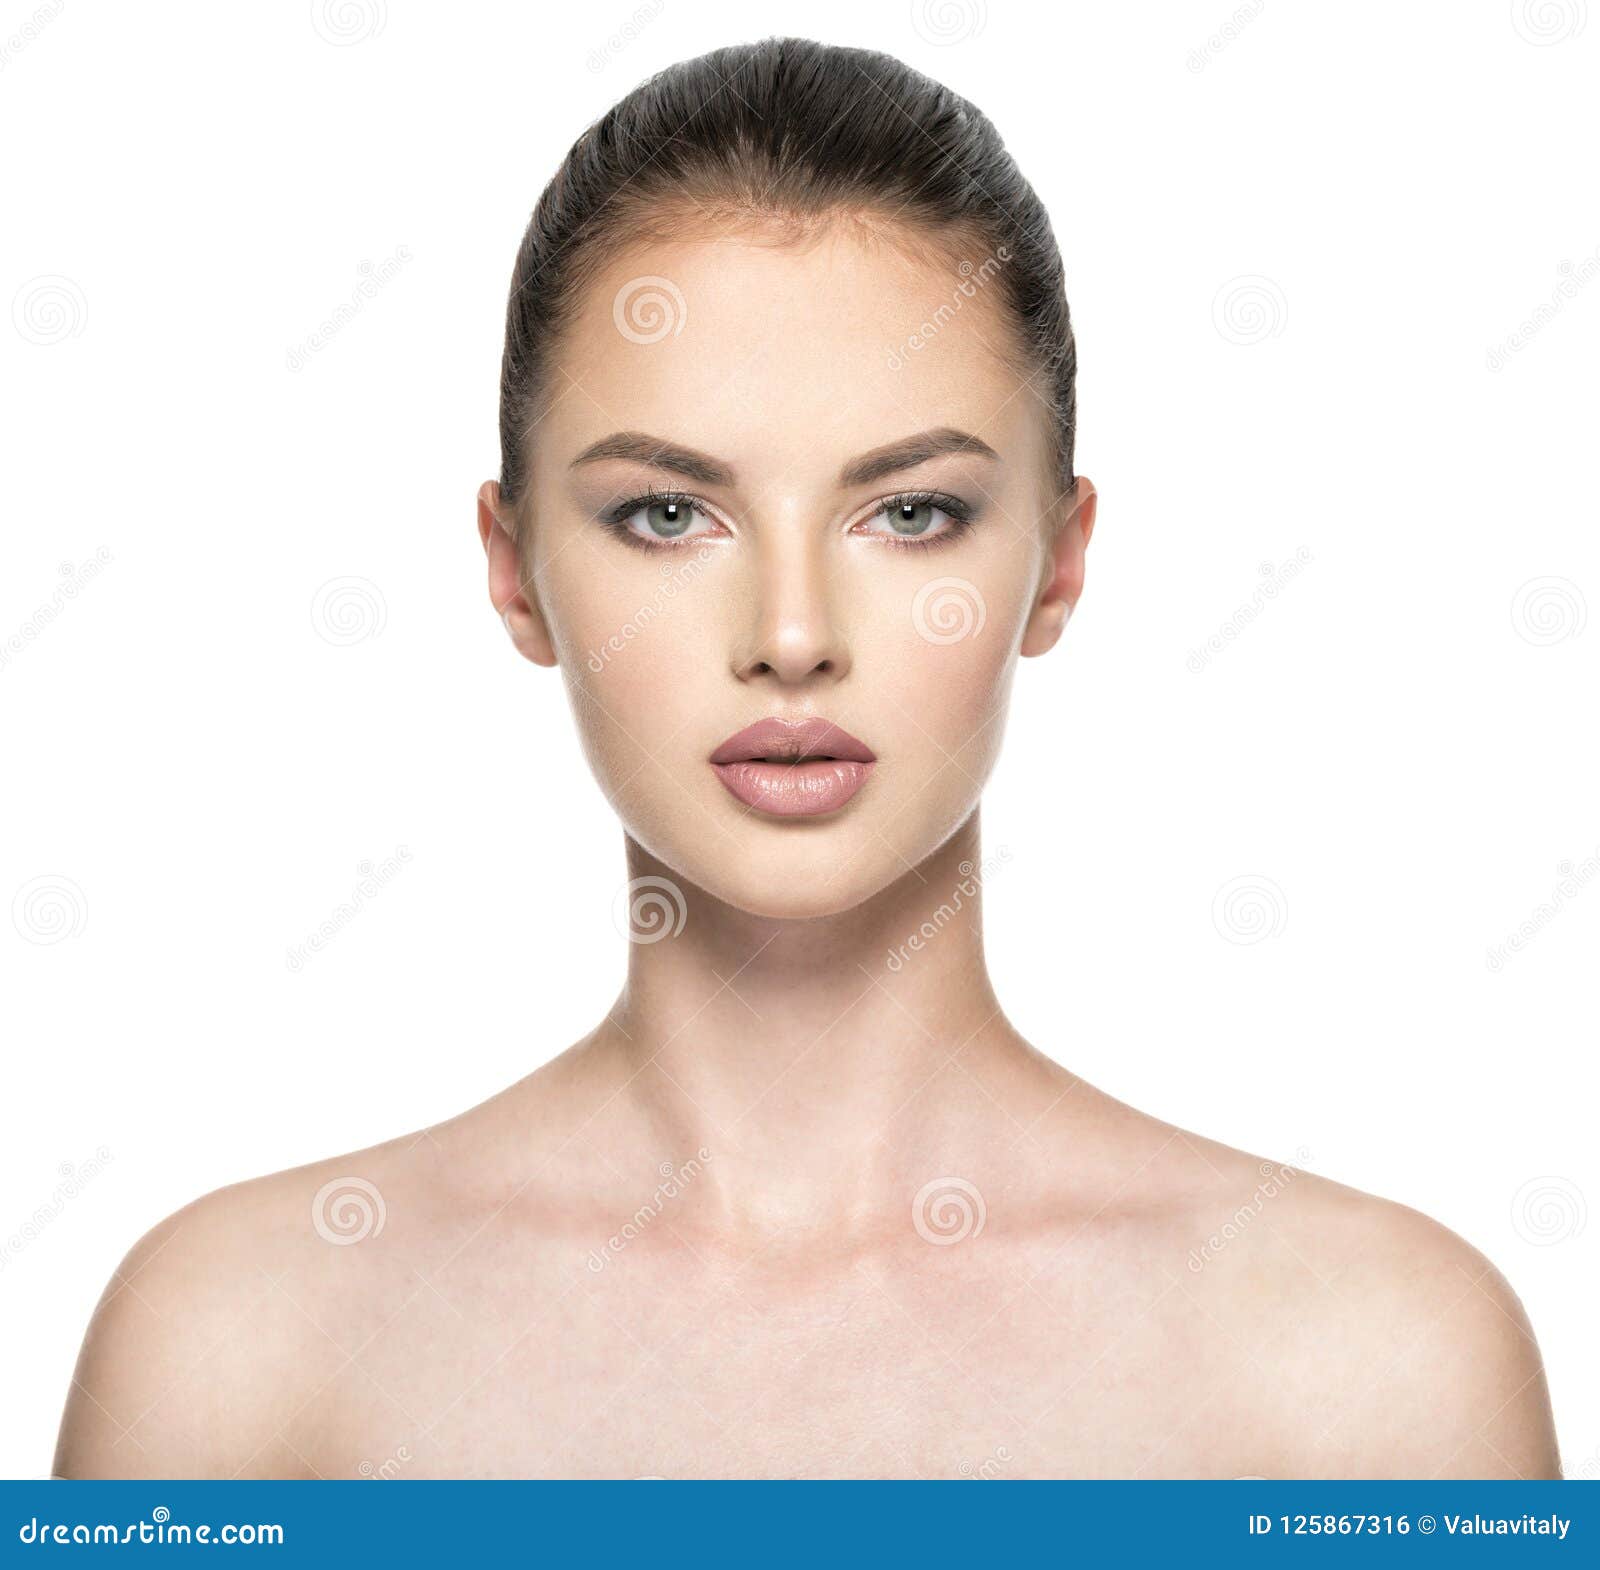 Woman Face Front And Side View : Face Reference Human Female Head 3d ...